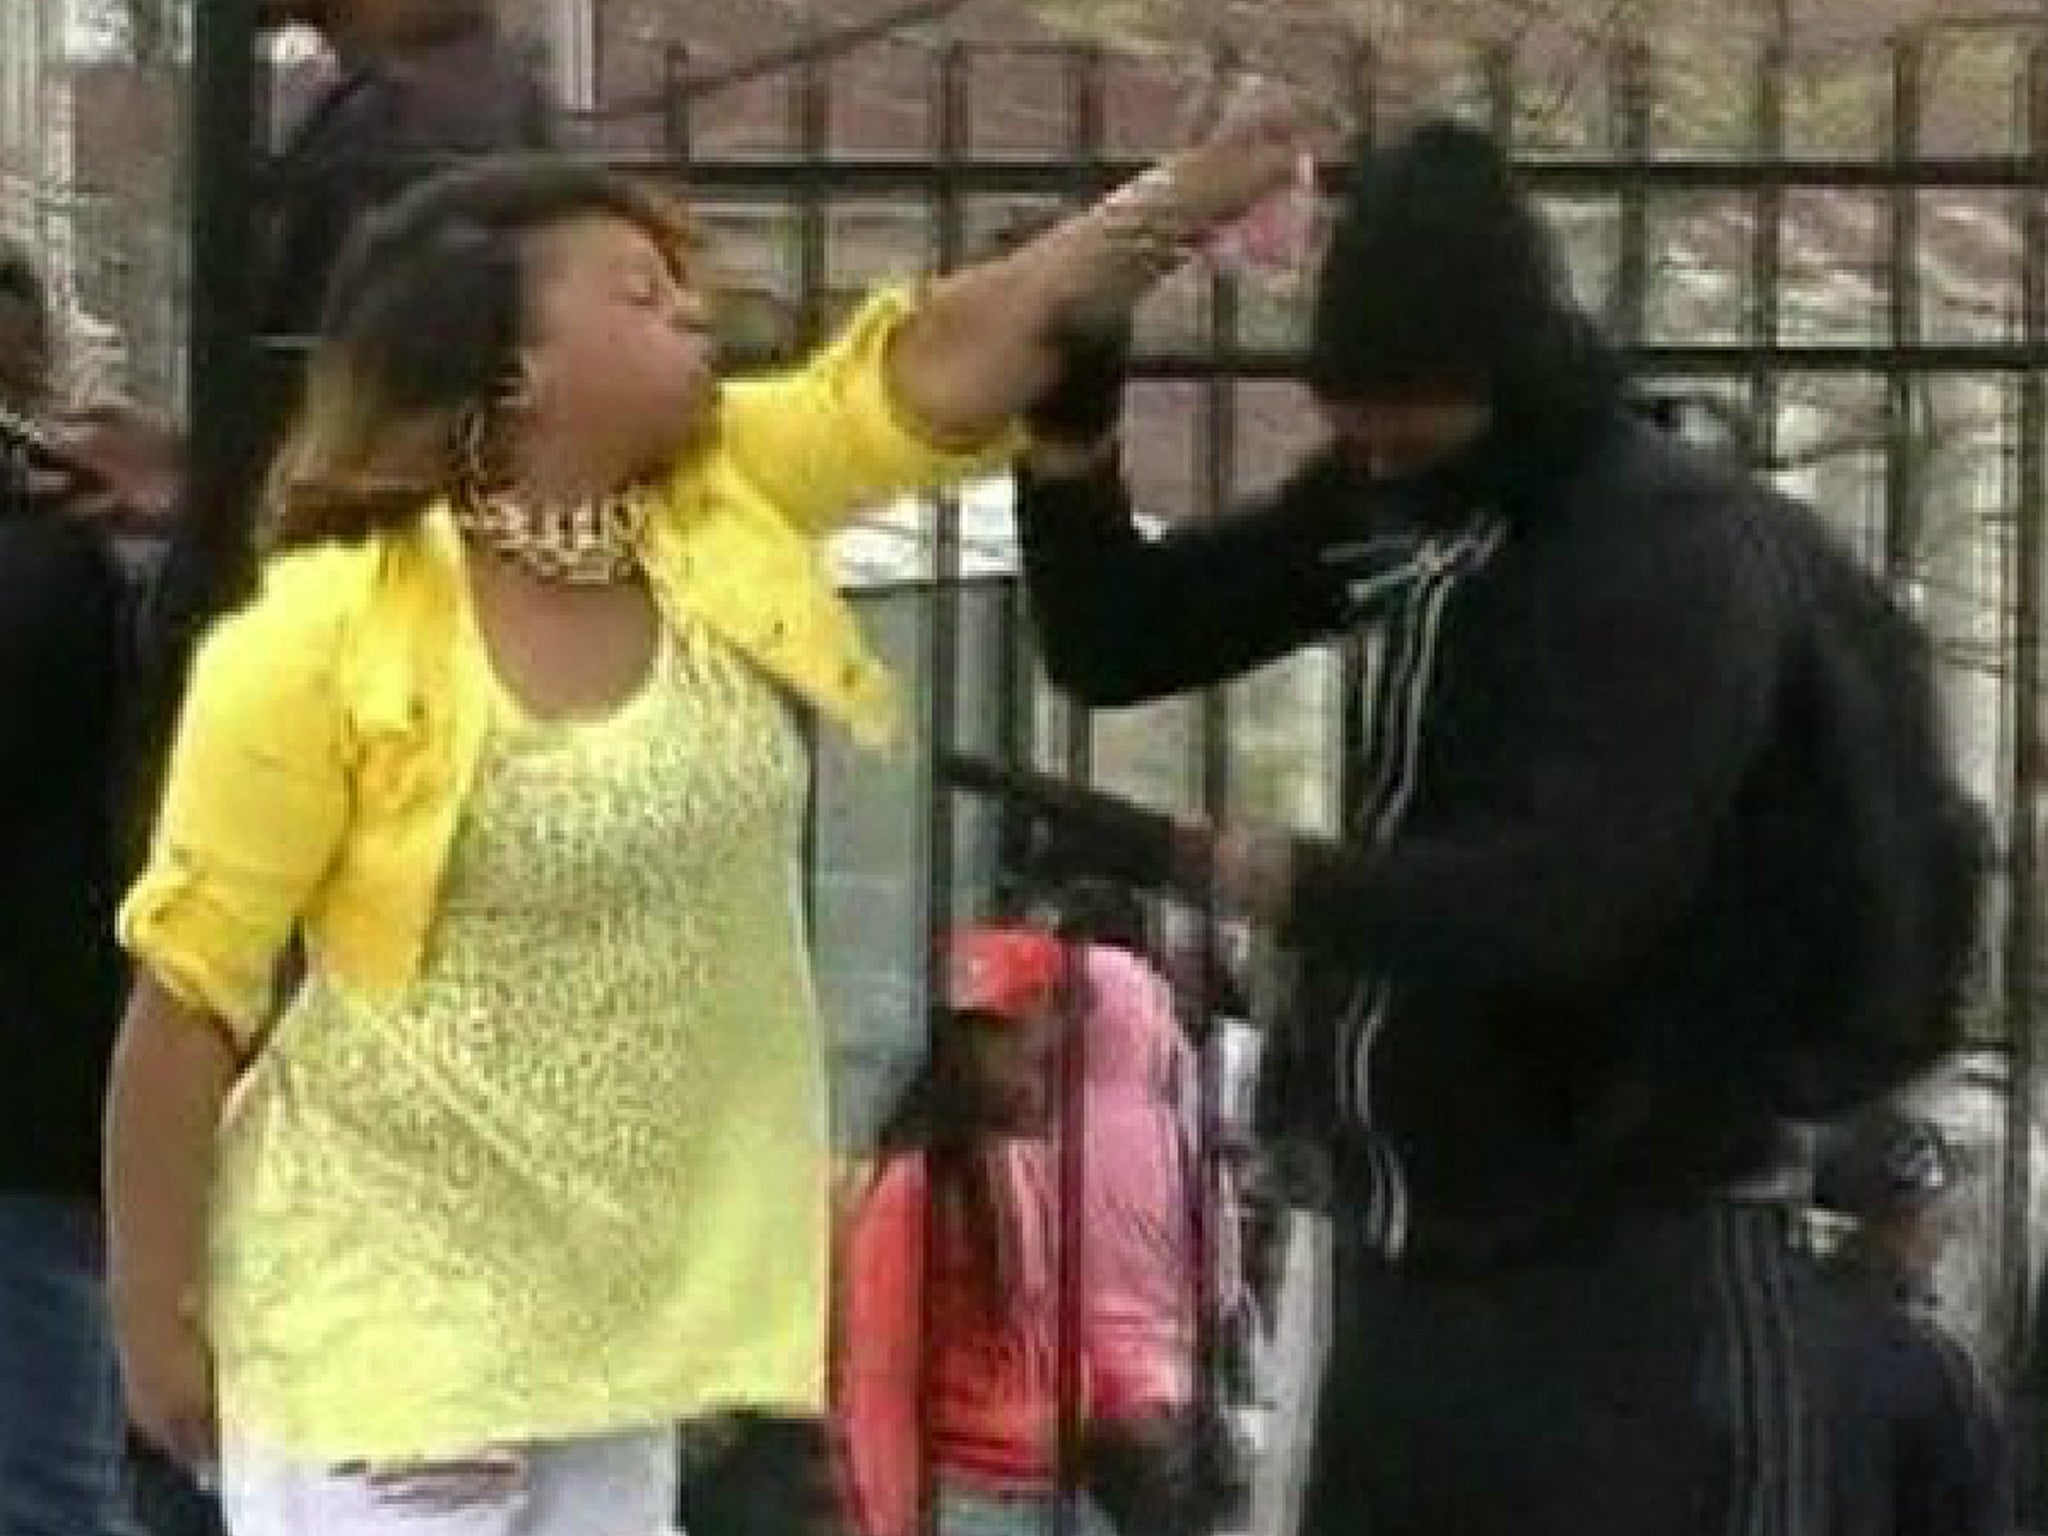 Baltimore mother Toya Graham showed more conviction than our leaders